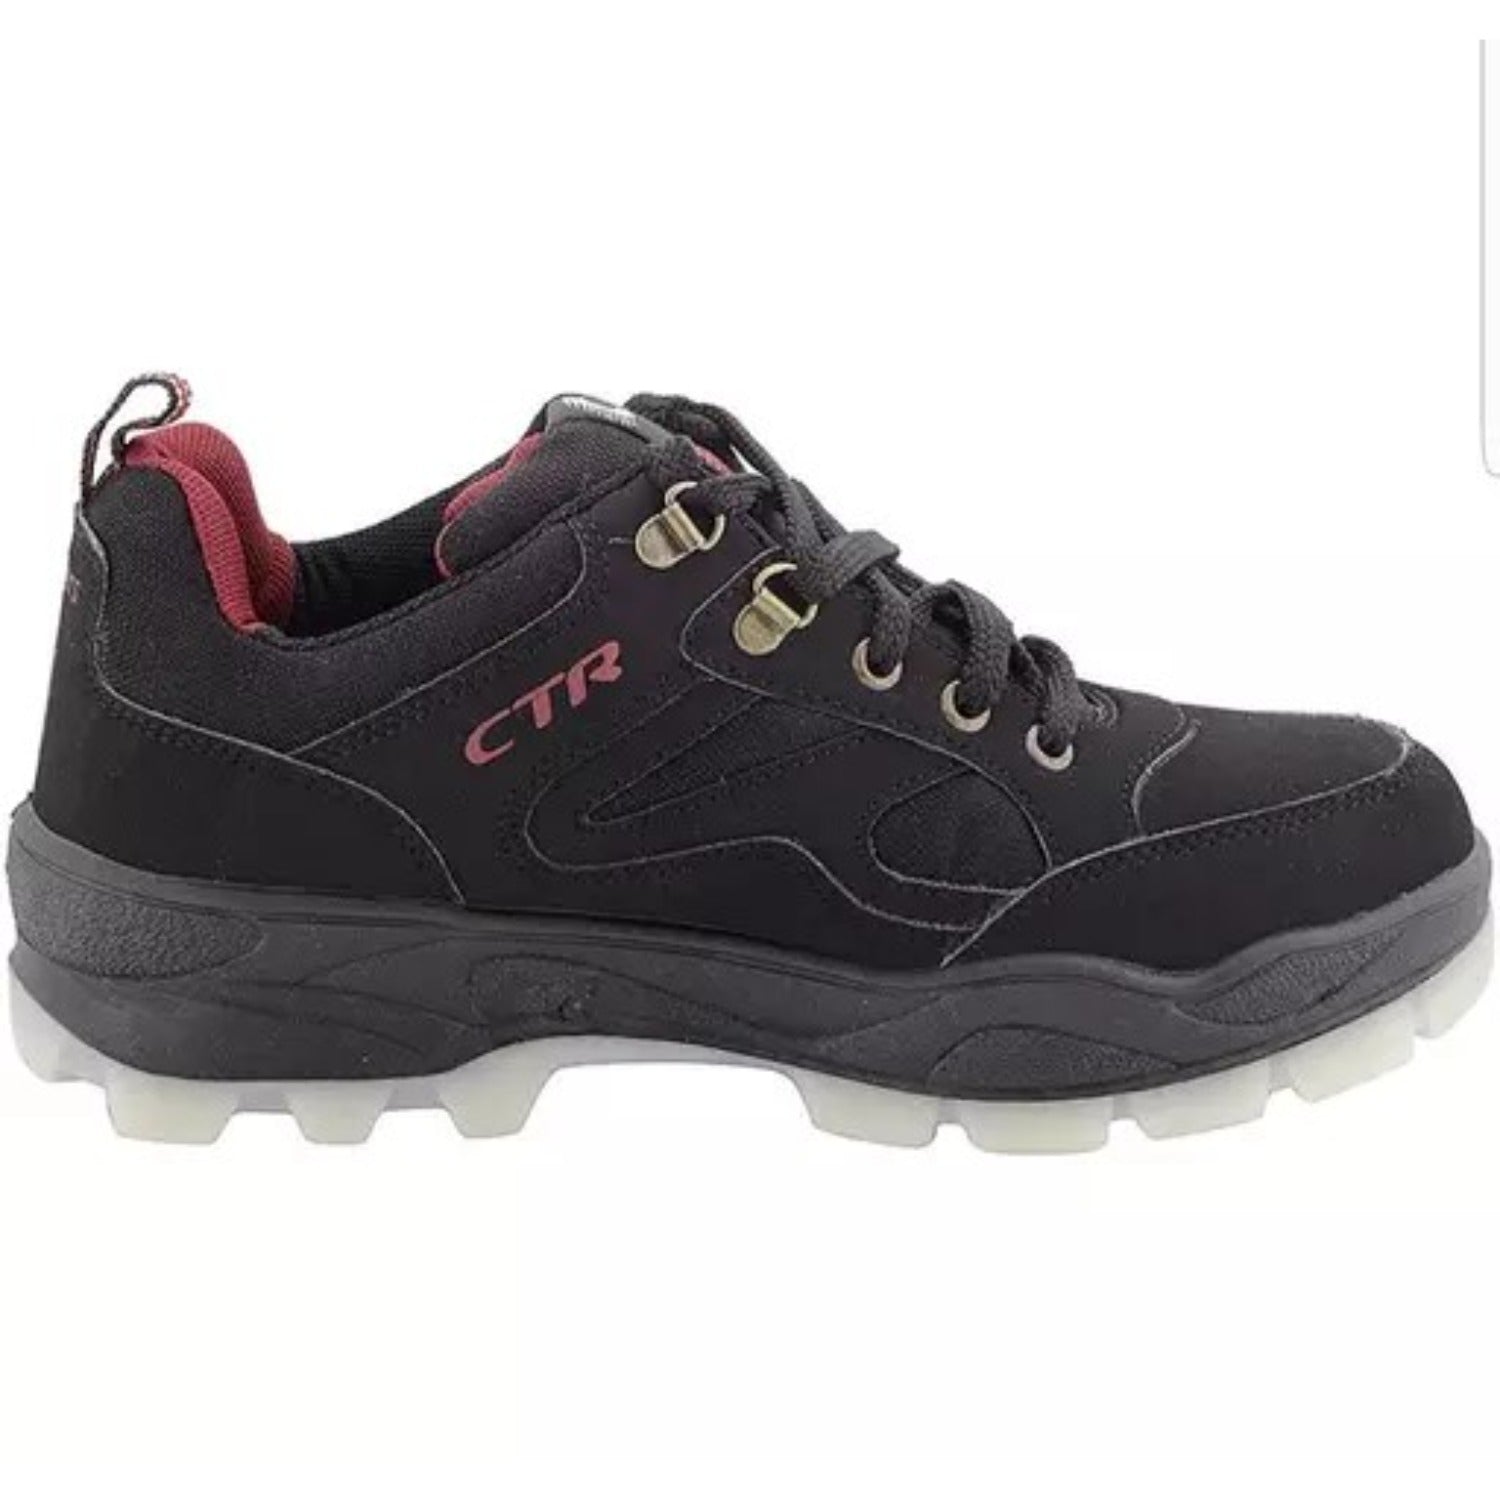 Buy Trekking Shoes - Low Ankle at Gokyo Outdoor Clothing & Gear